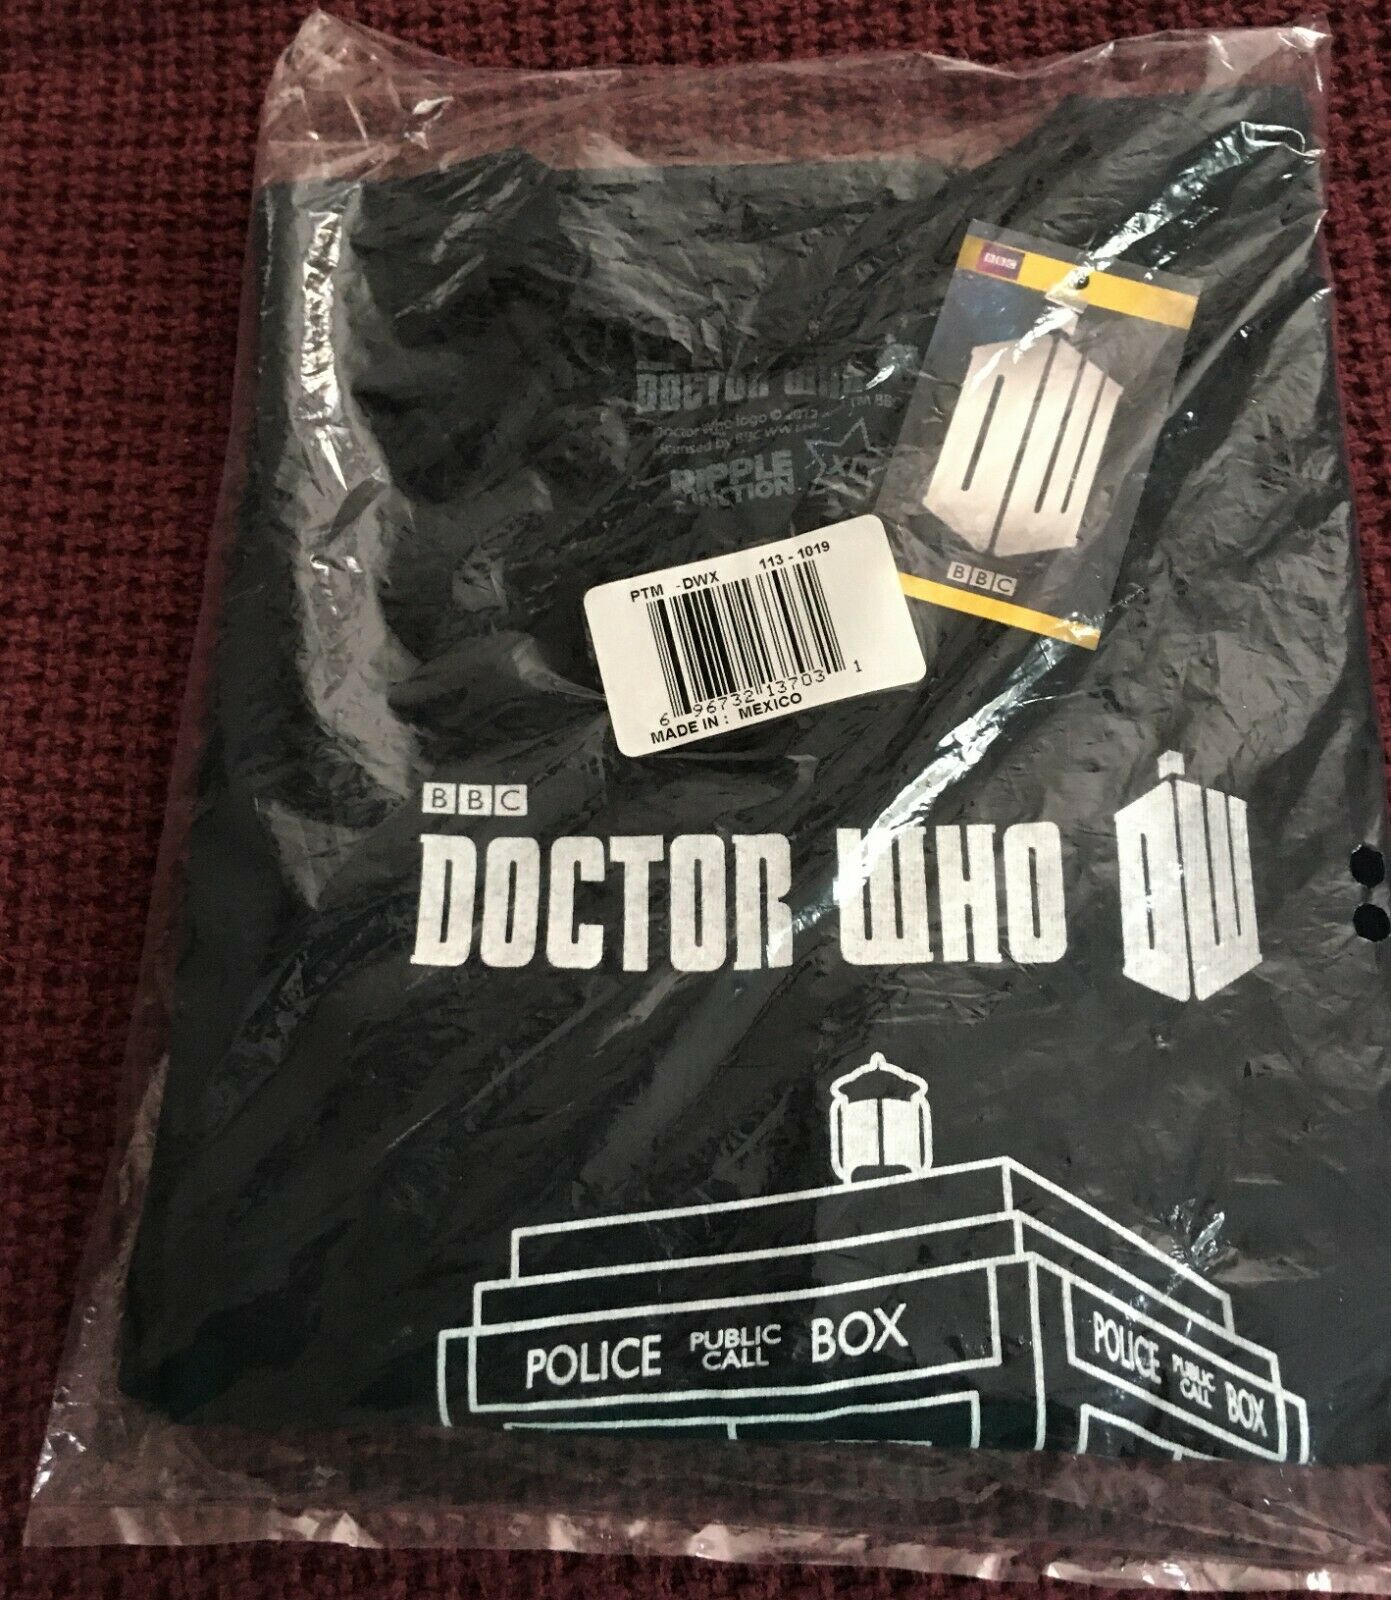 Bbc Doctor Who Police Box Size Xl T Shirt Sealed New With Tag